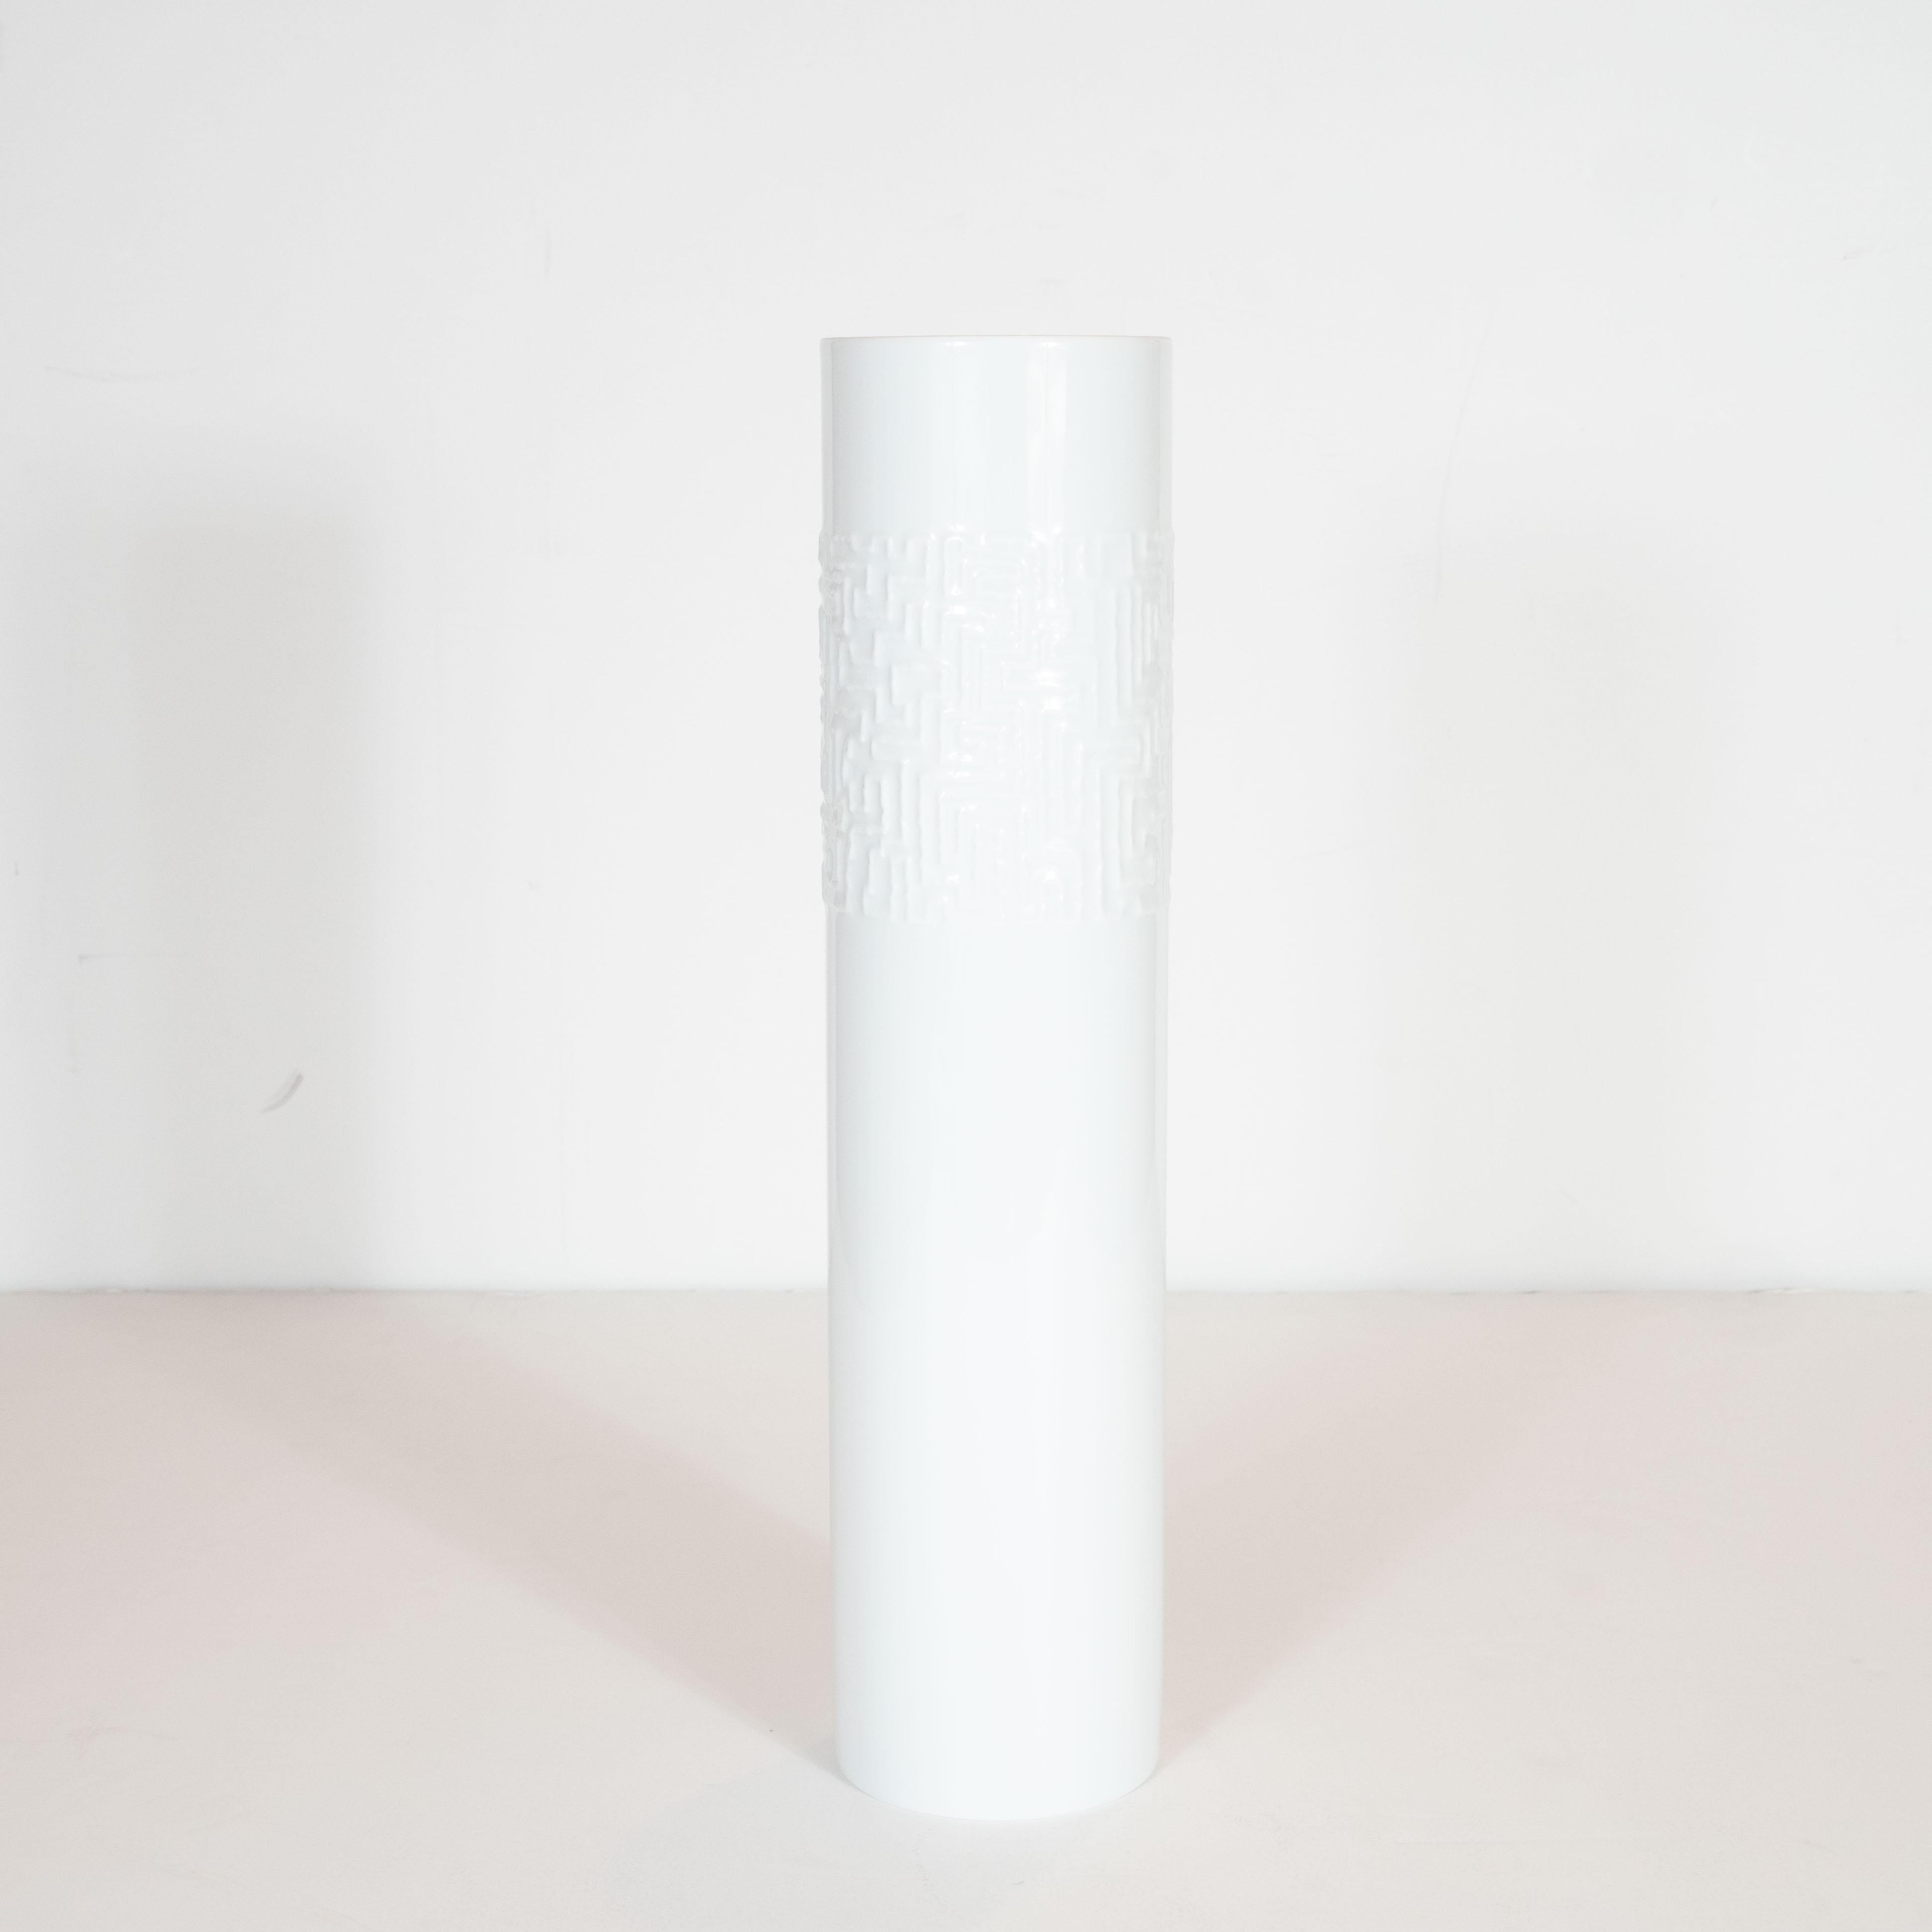 This elegant and understated vase was realized by the esteemed maker Rosenthal, circa 1980. The piece offers an austere cylindrical silhouette with a wide band of raised abstracted Brutalist hieroglyphic inscriptions. With its monochromatic palate